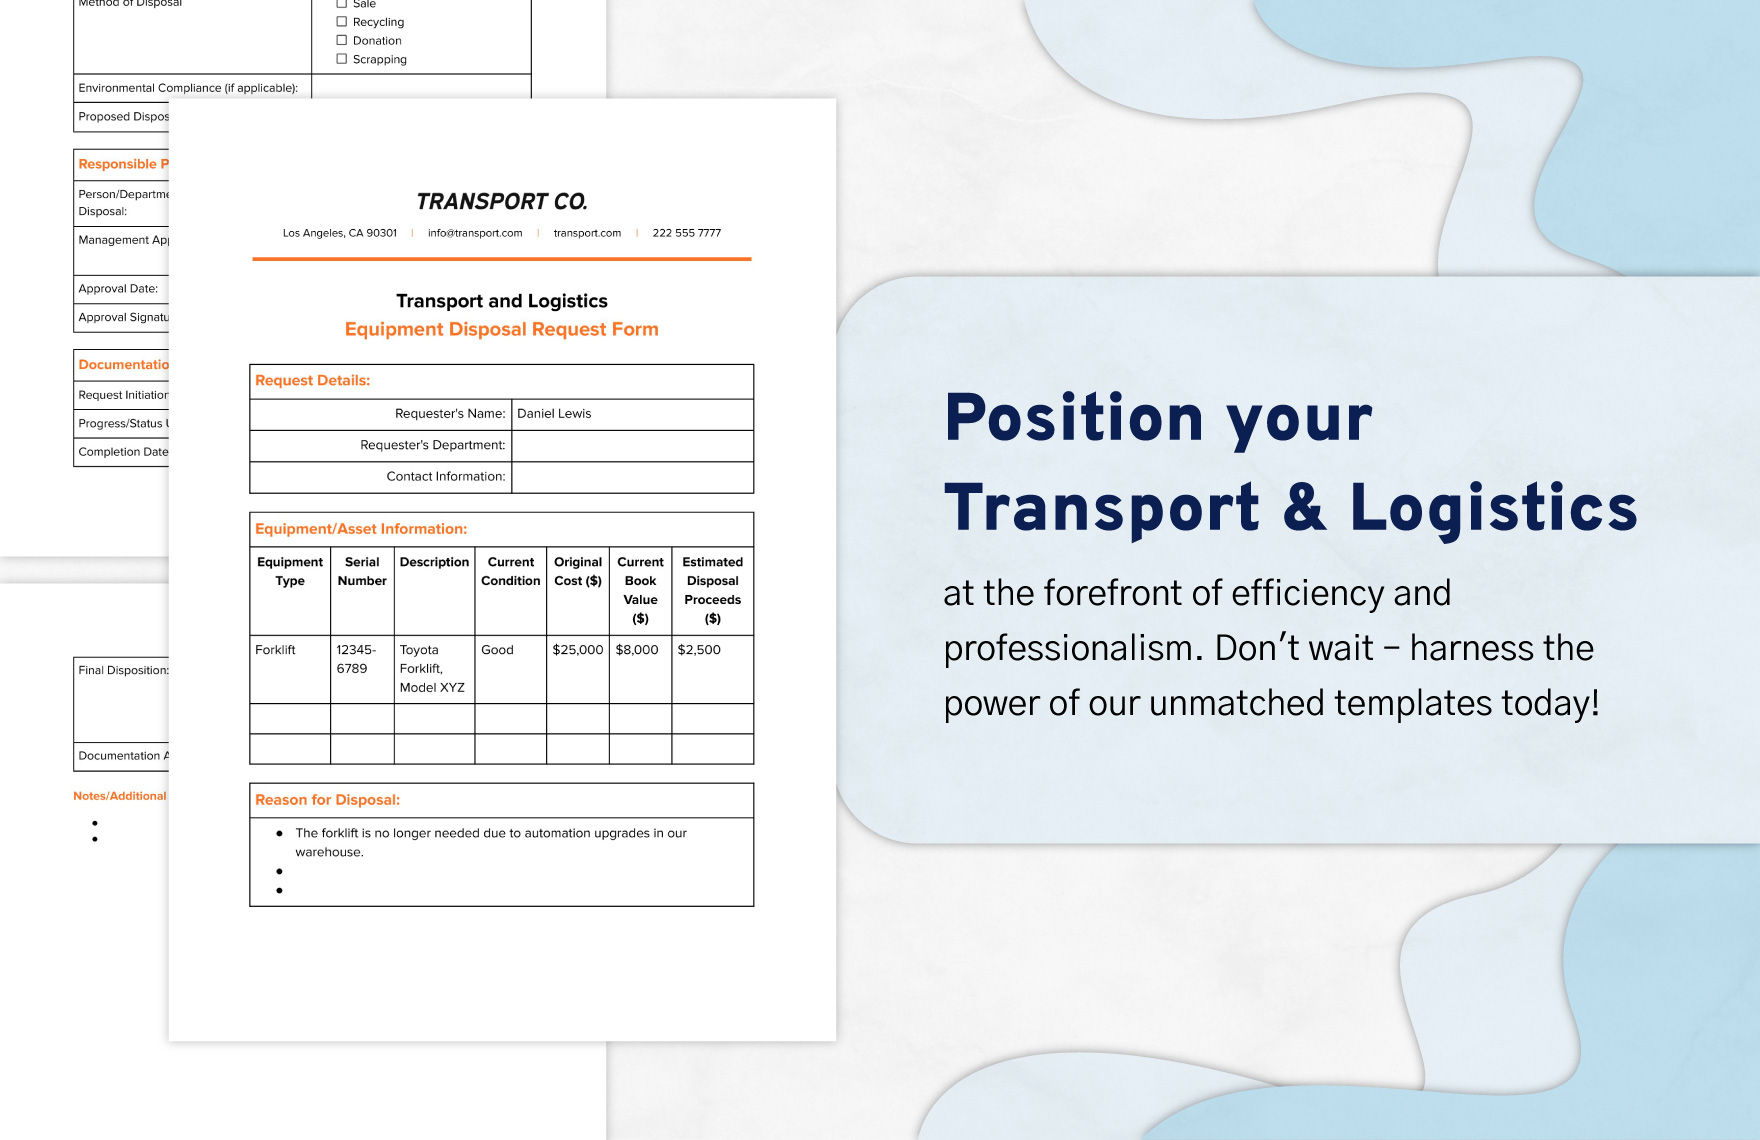 Transport and Logistics Equipment Disposal Request Form Template